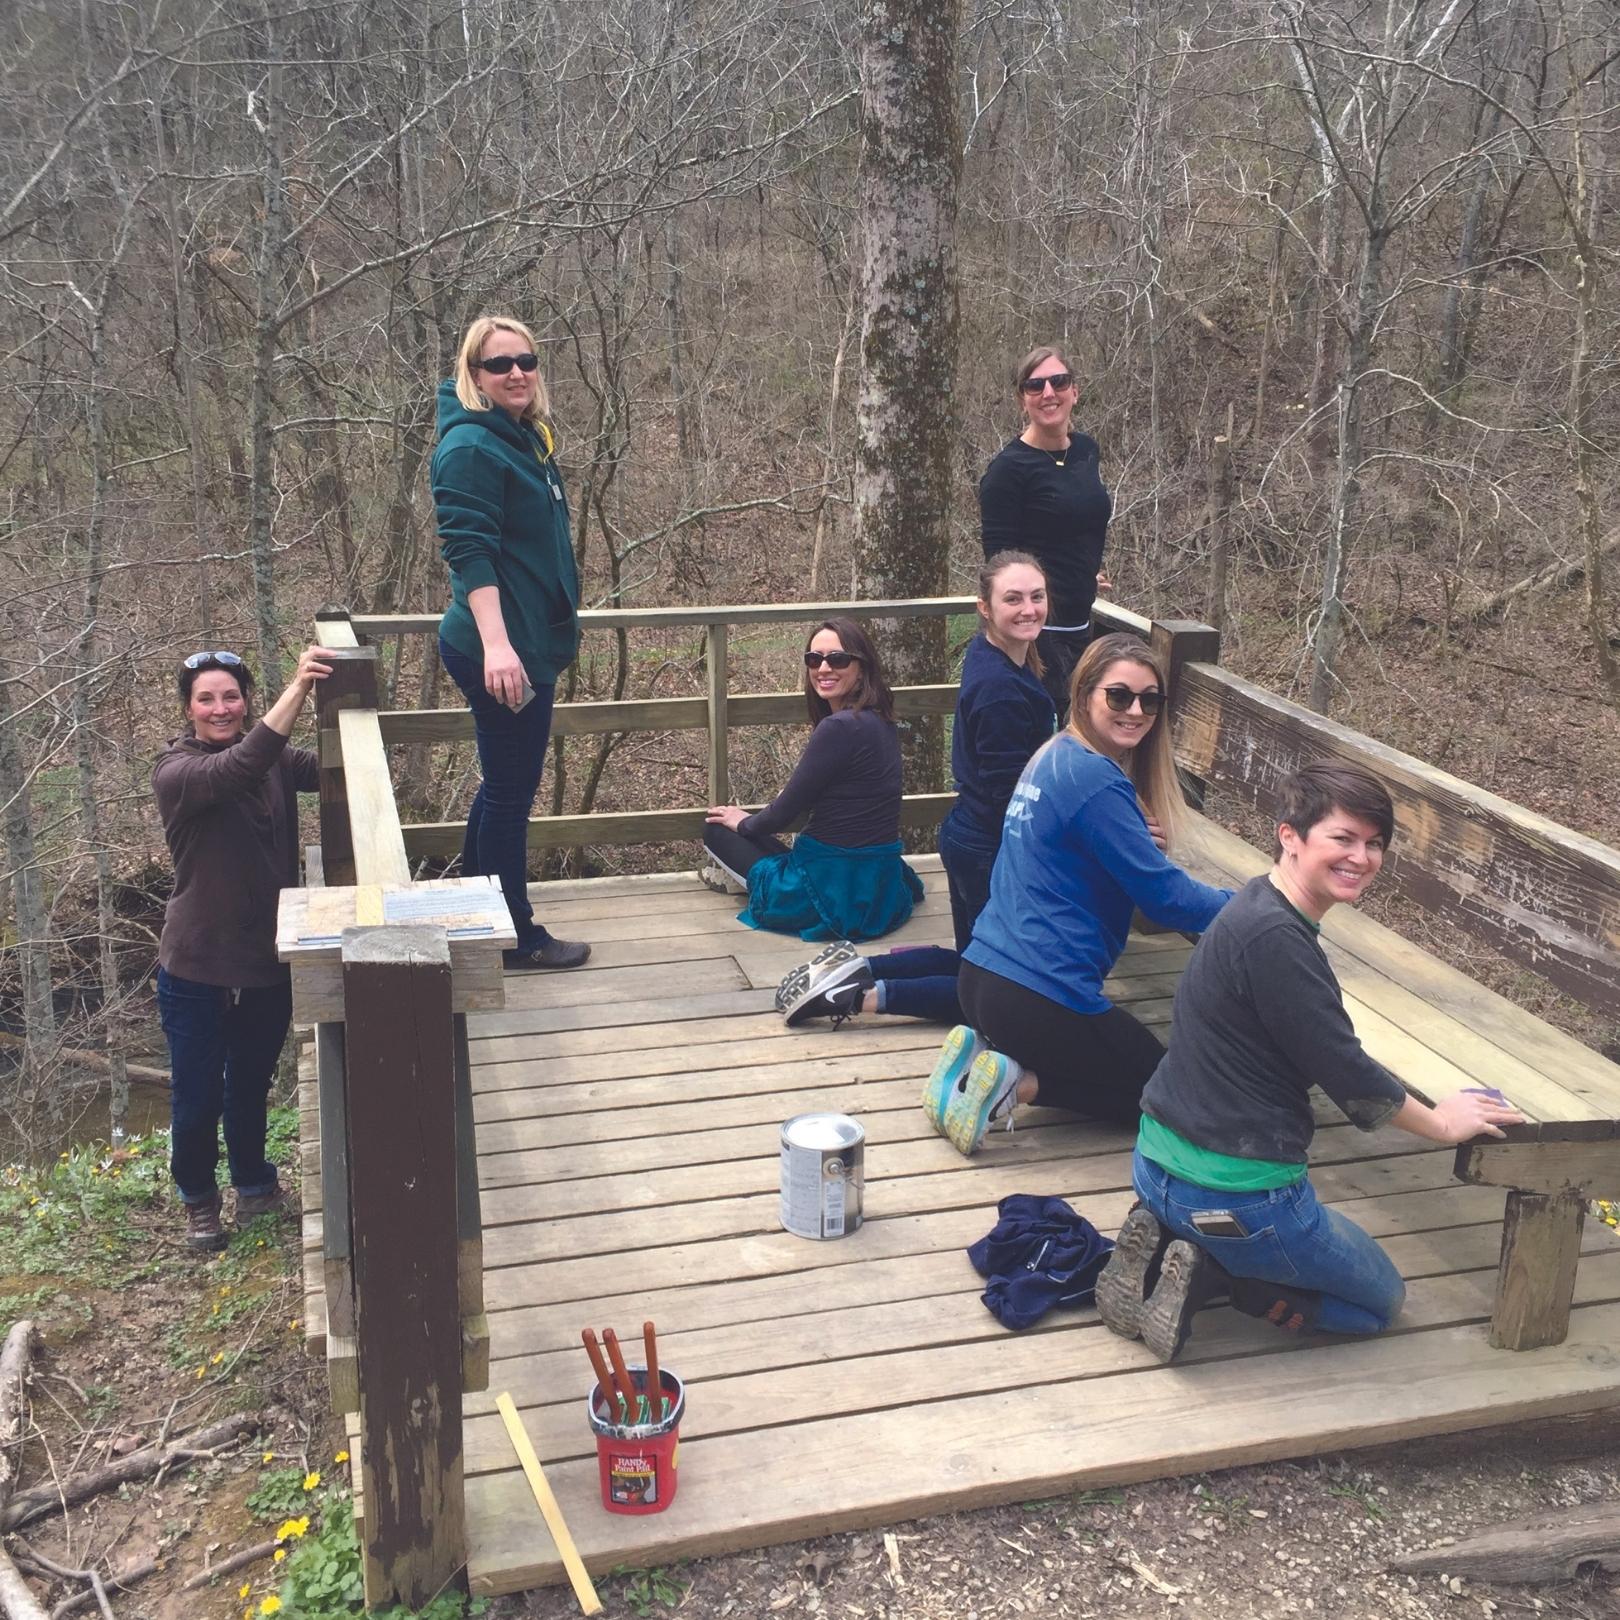 A group of young women working on finishing a wooden overlook in the woods